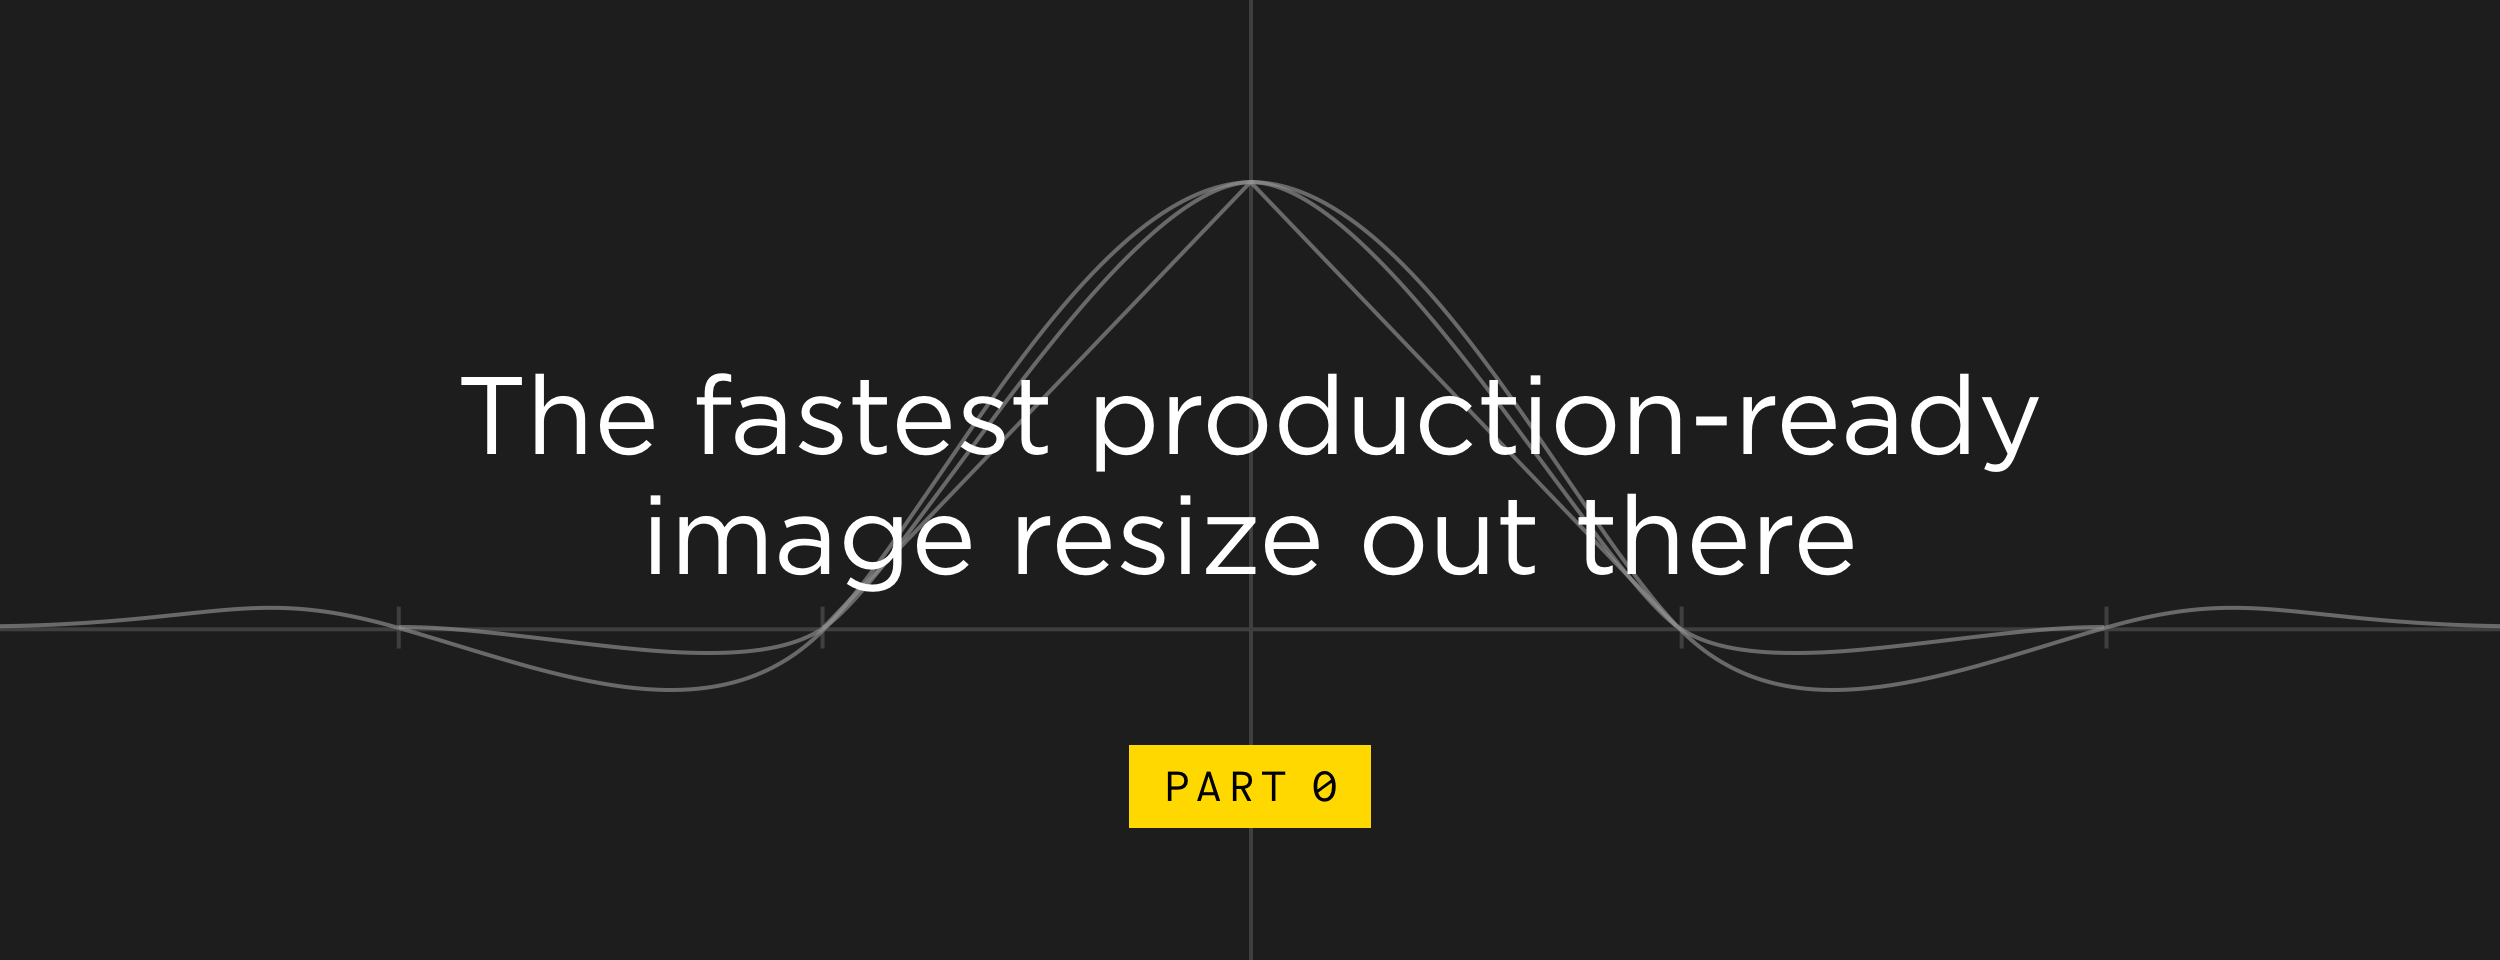 The fastest production-ready image resize. Part 0